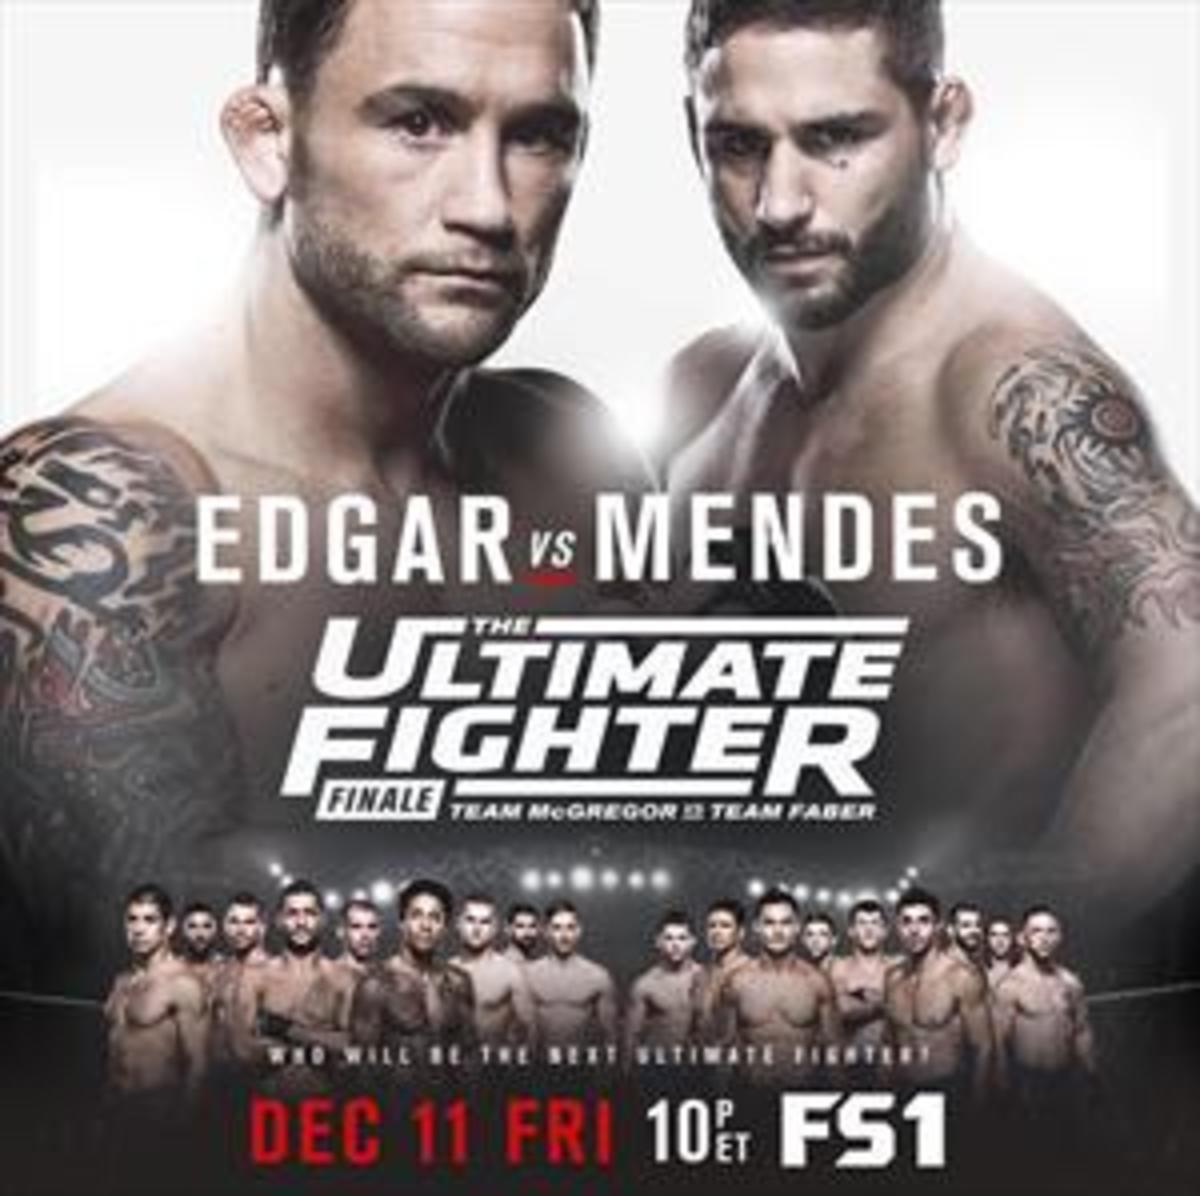 The Ultimate Fighter 22 Finale takes place on Friday night.